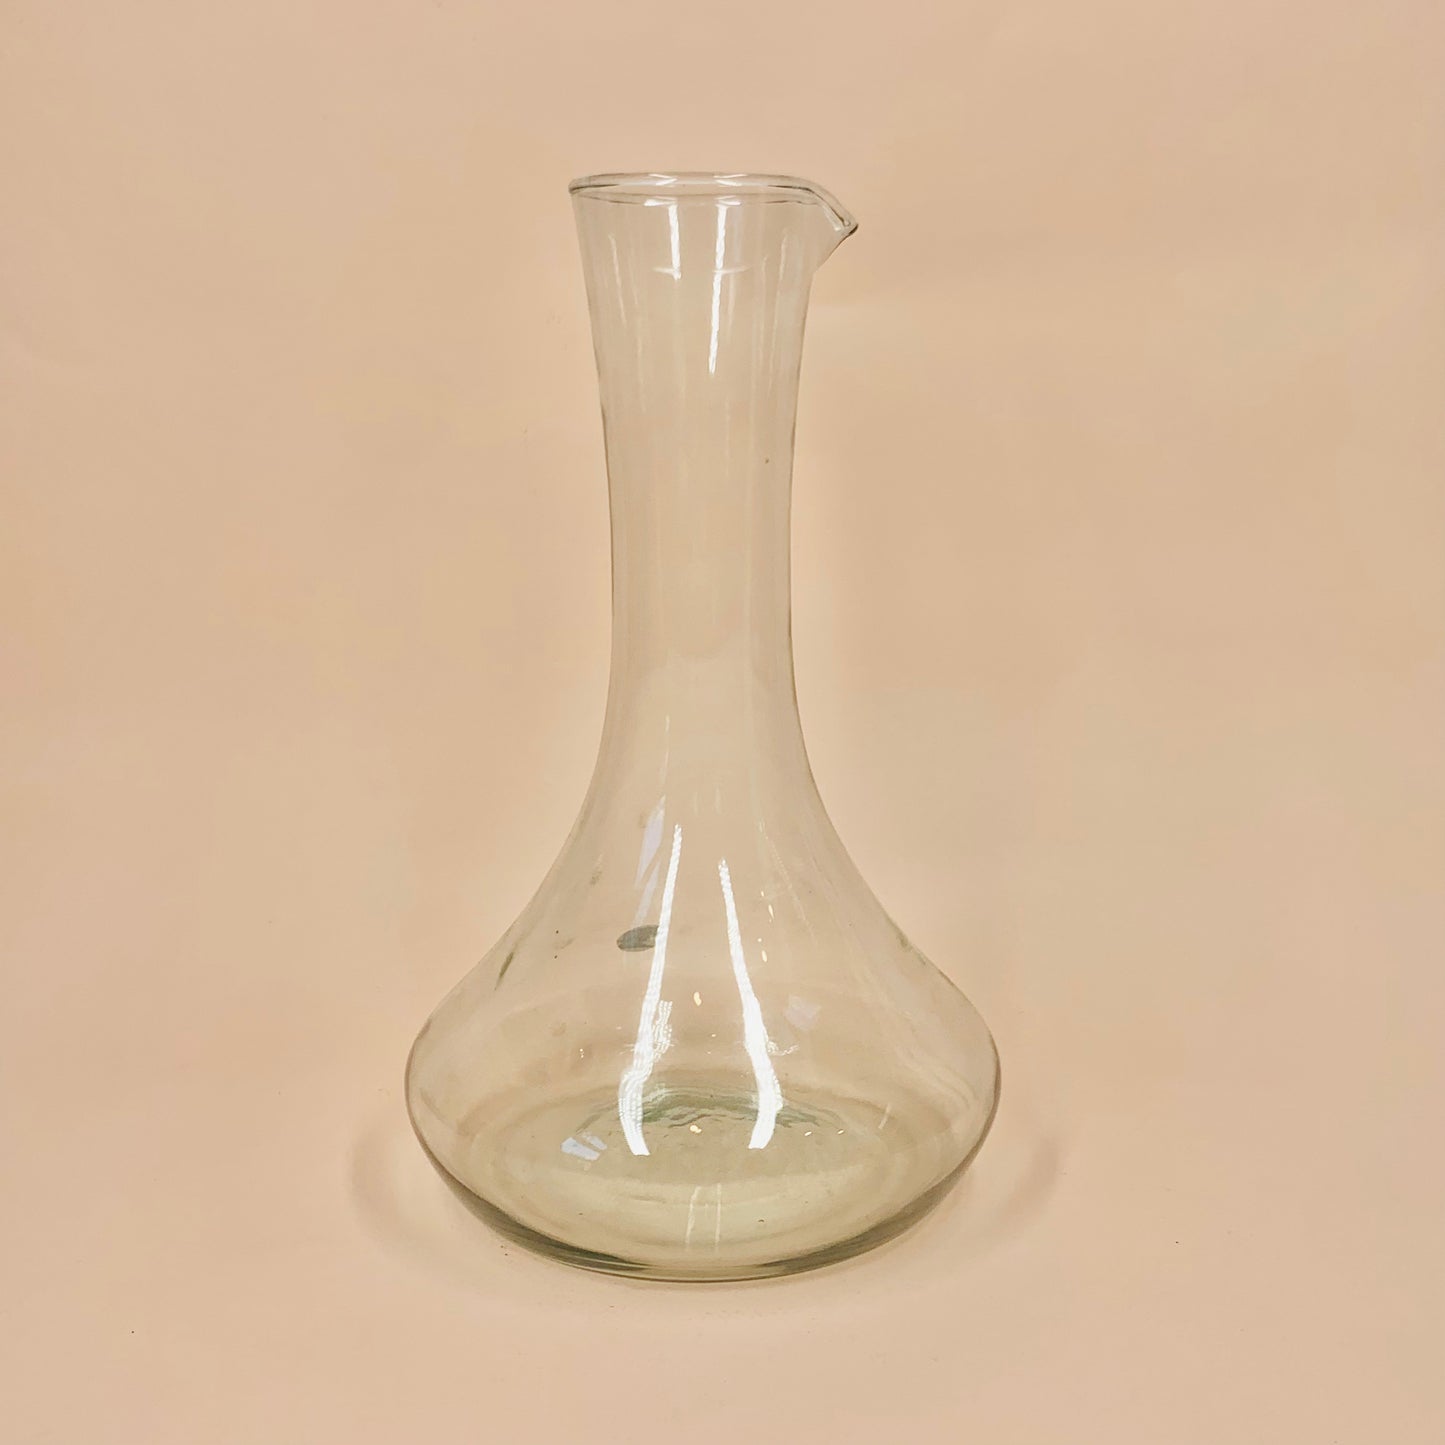 Vintage recycled glass decanter